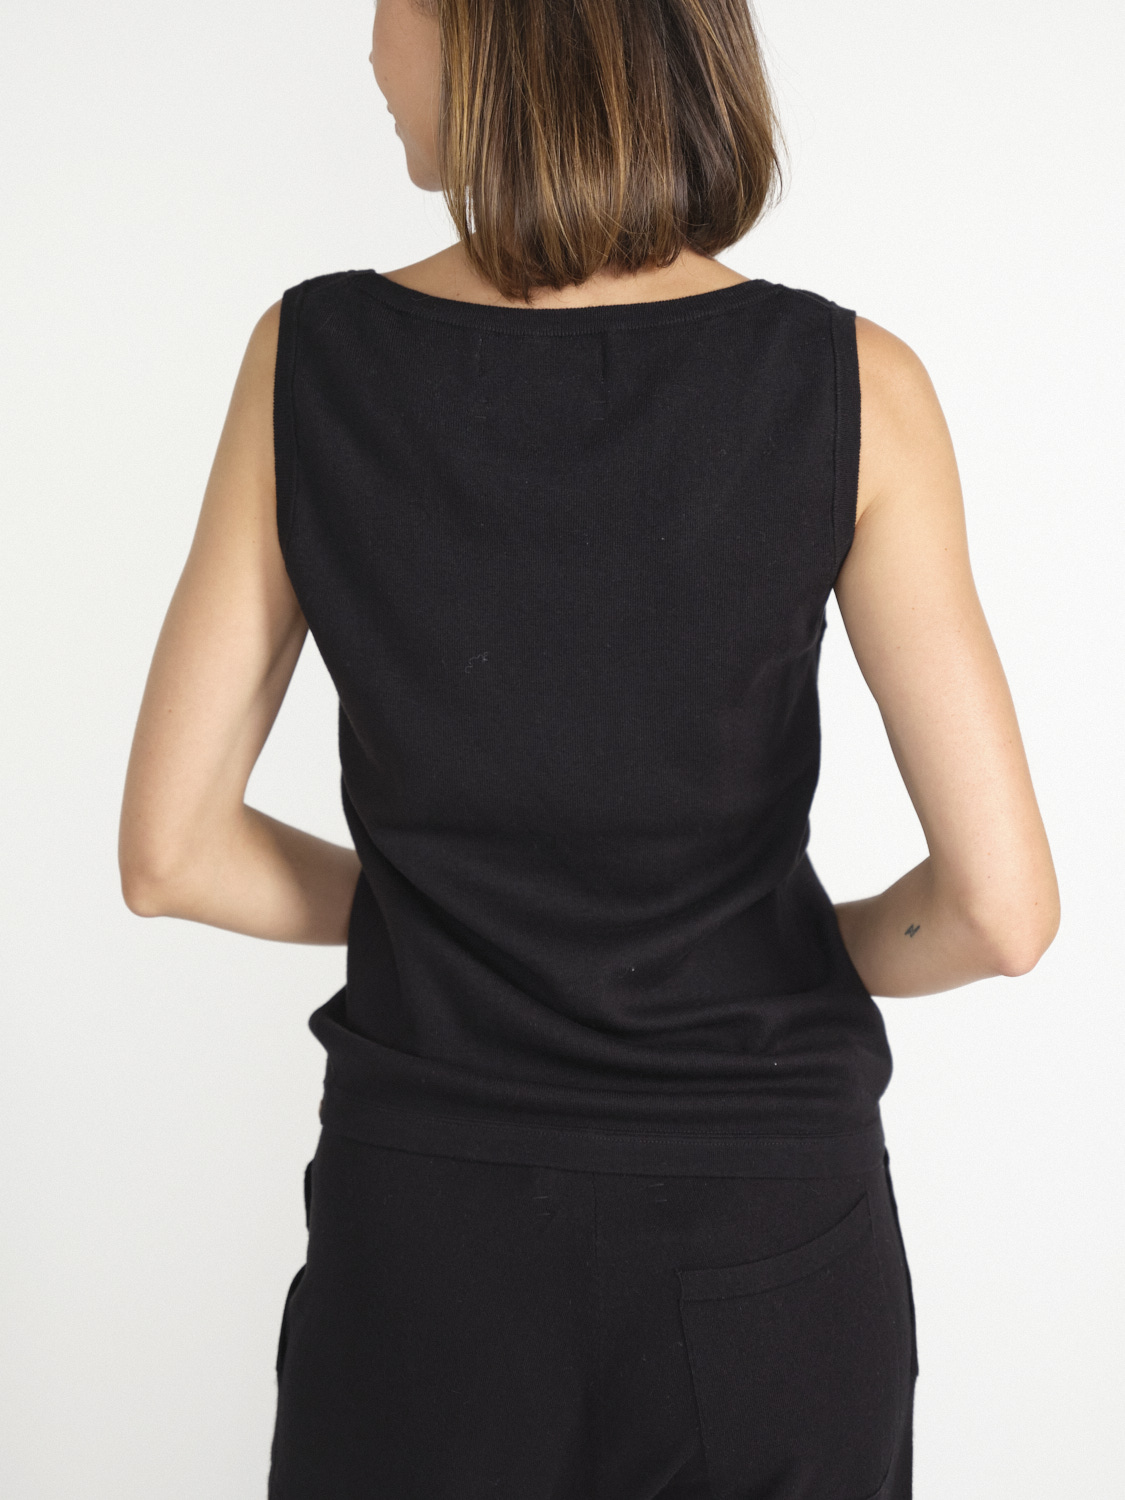 Extreme Cashmere N°333 Singlet – top made from a cotton-cashmere mix  black One Size